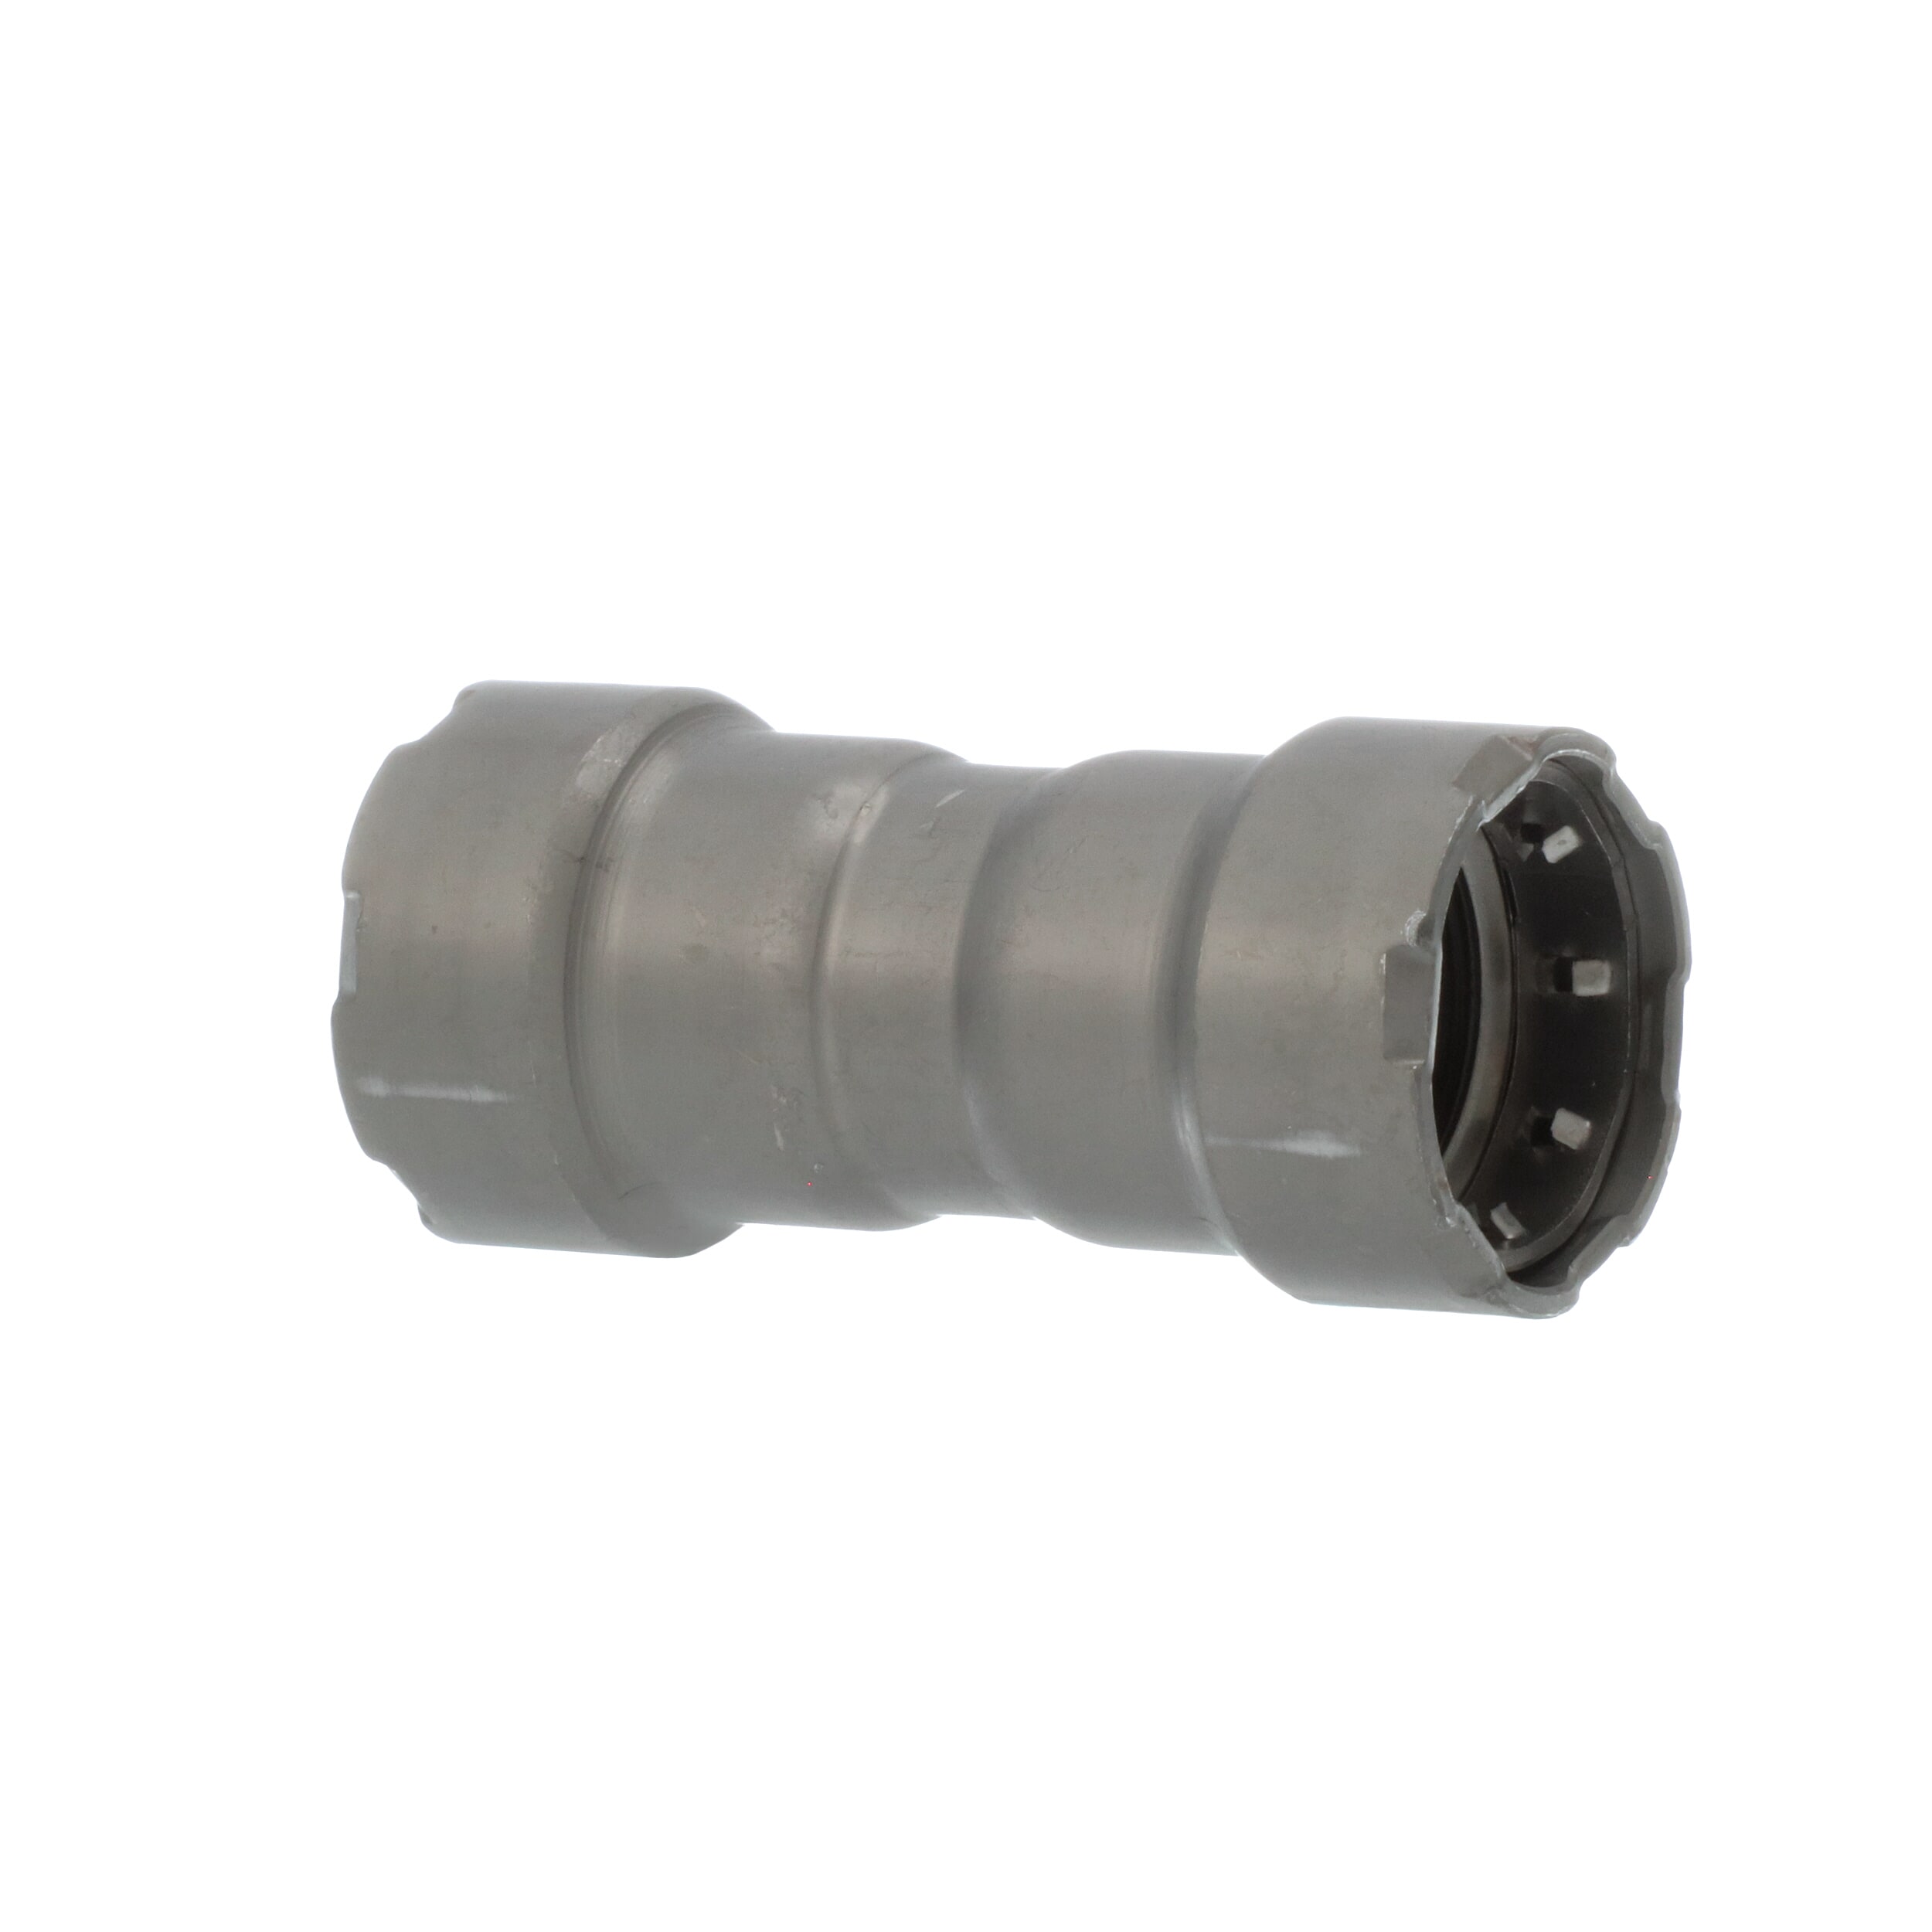 MegaPress® 25000 Pipe Coupling With Stop, 1/2 in Nominal, Press End Style, Carbon Steel